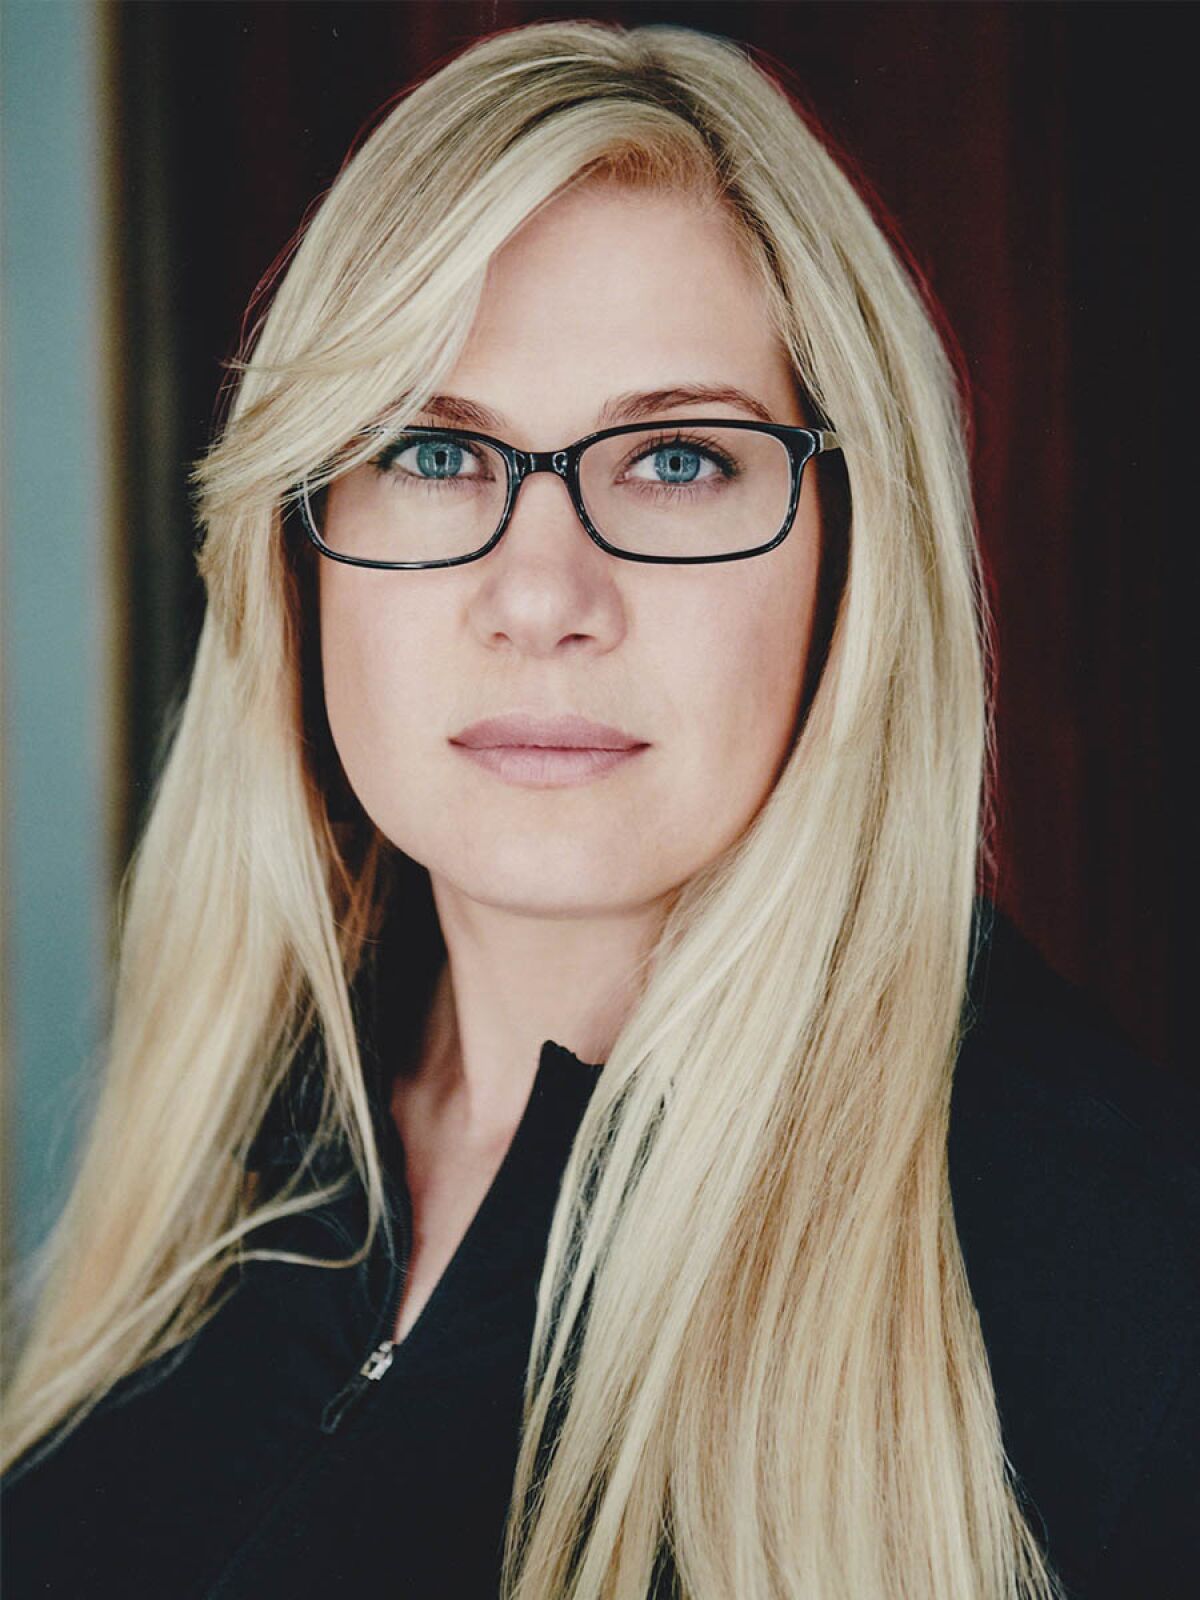 A portrait of a blond woman with glasses.